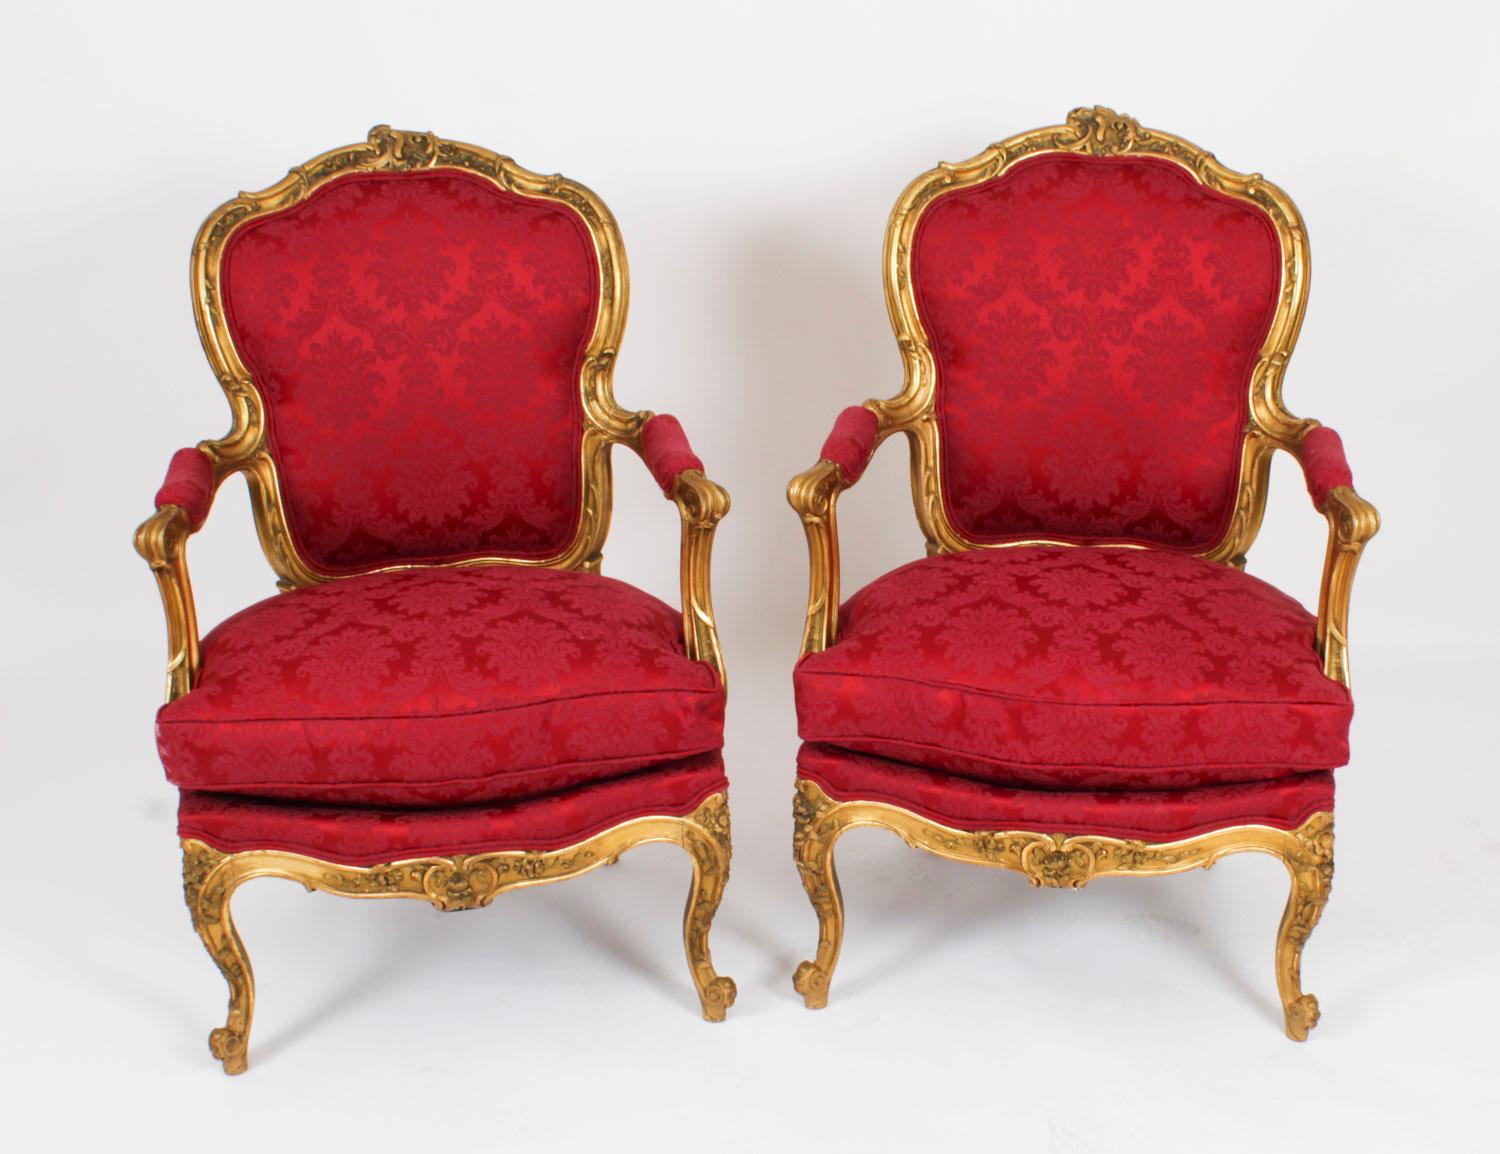 Antique Pair of Louis XV Revival Giltwood Armchairs 19 Century For Sale 14